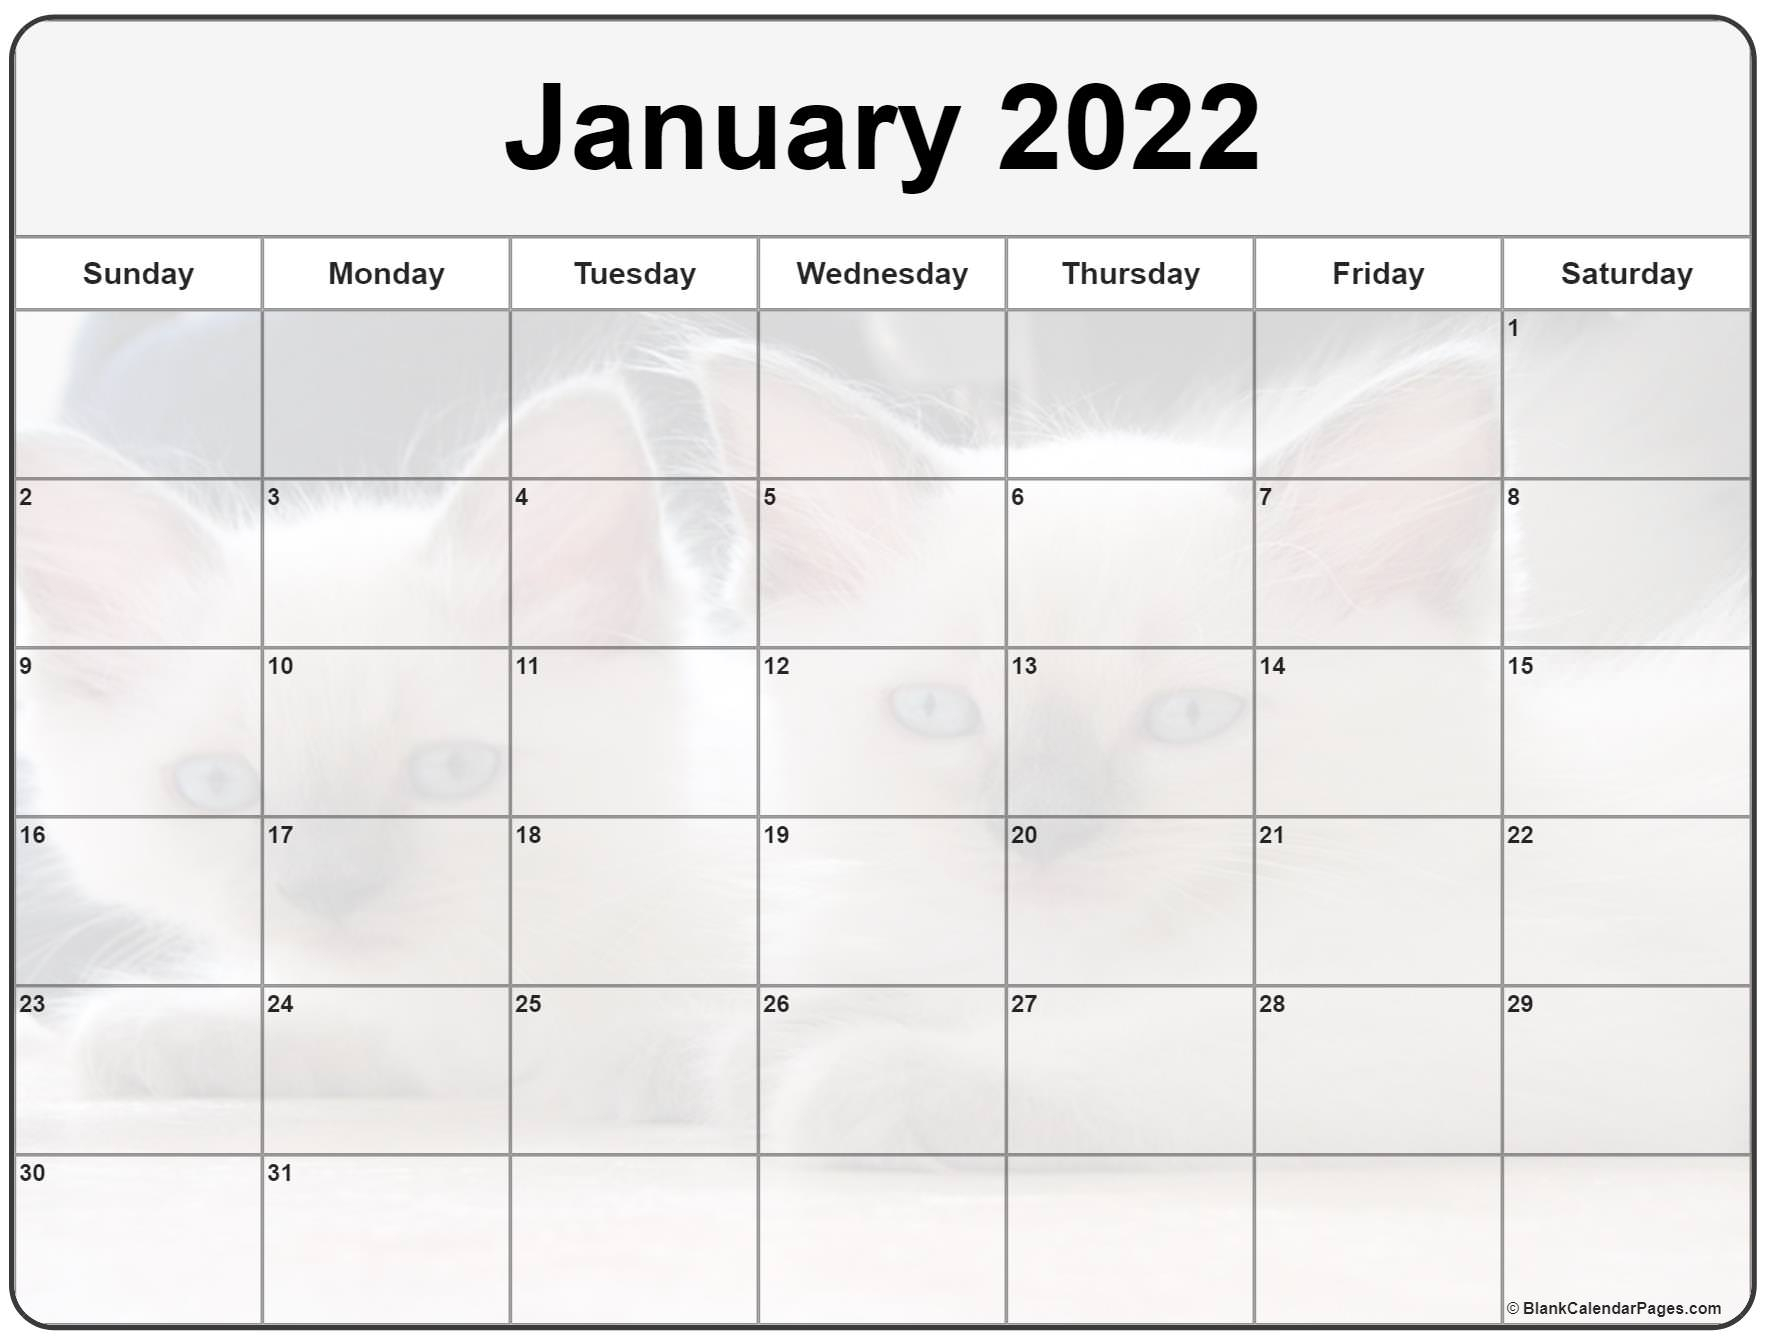 Collection Of January 2022 Photo Calendars With Image Filters.